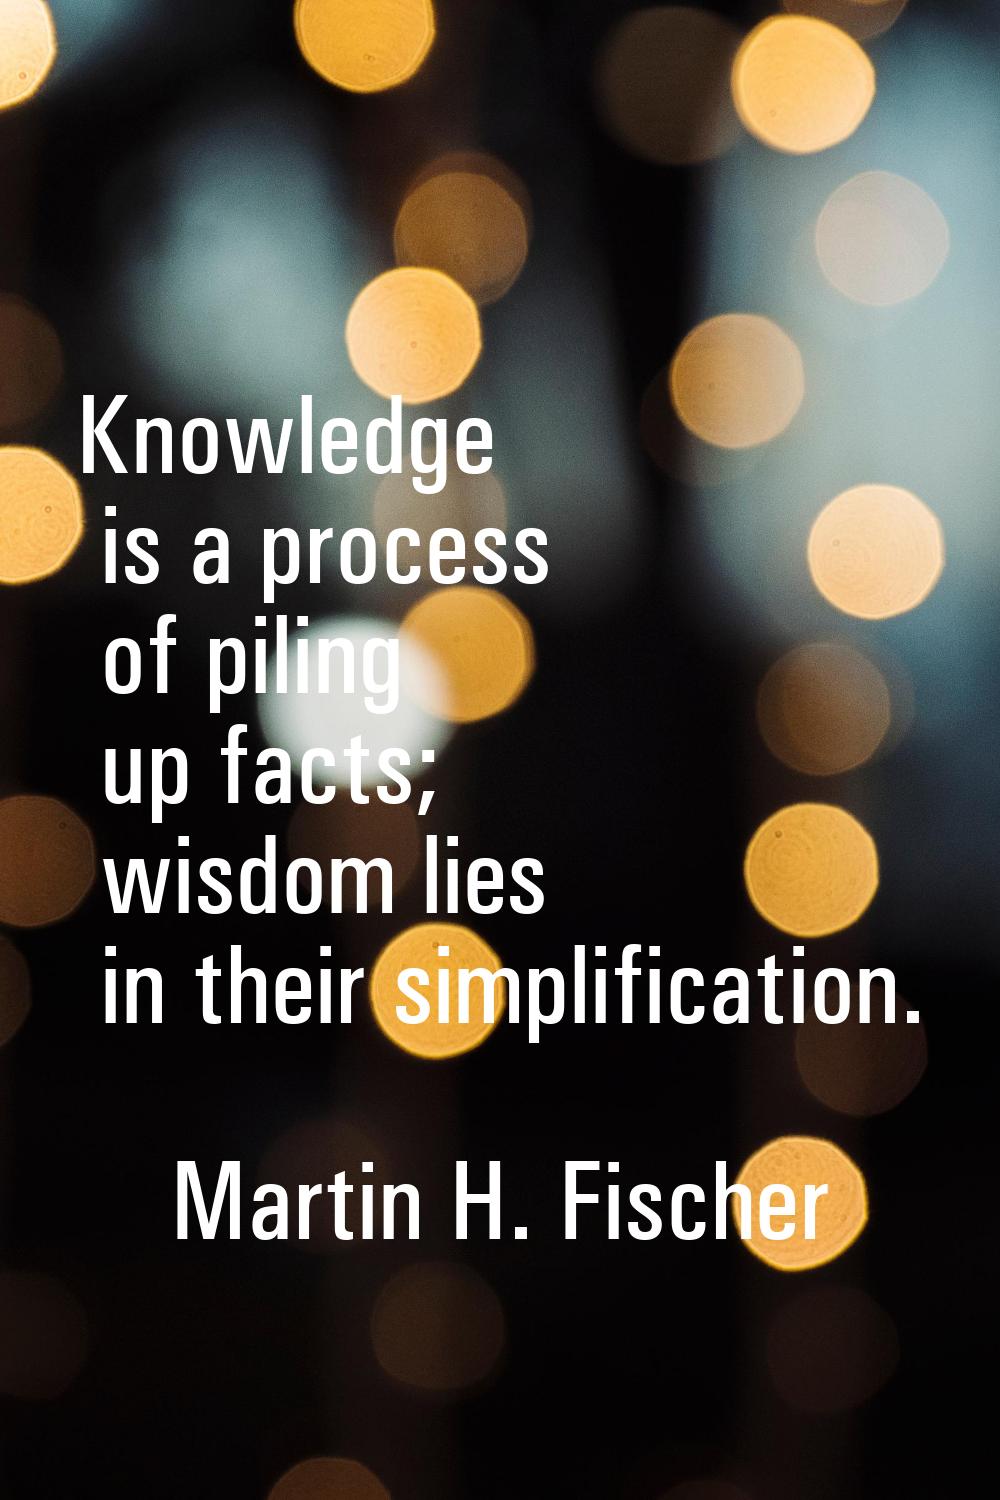 Knowledge is a process of piling up facts; wisdom lies in their simplification.